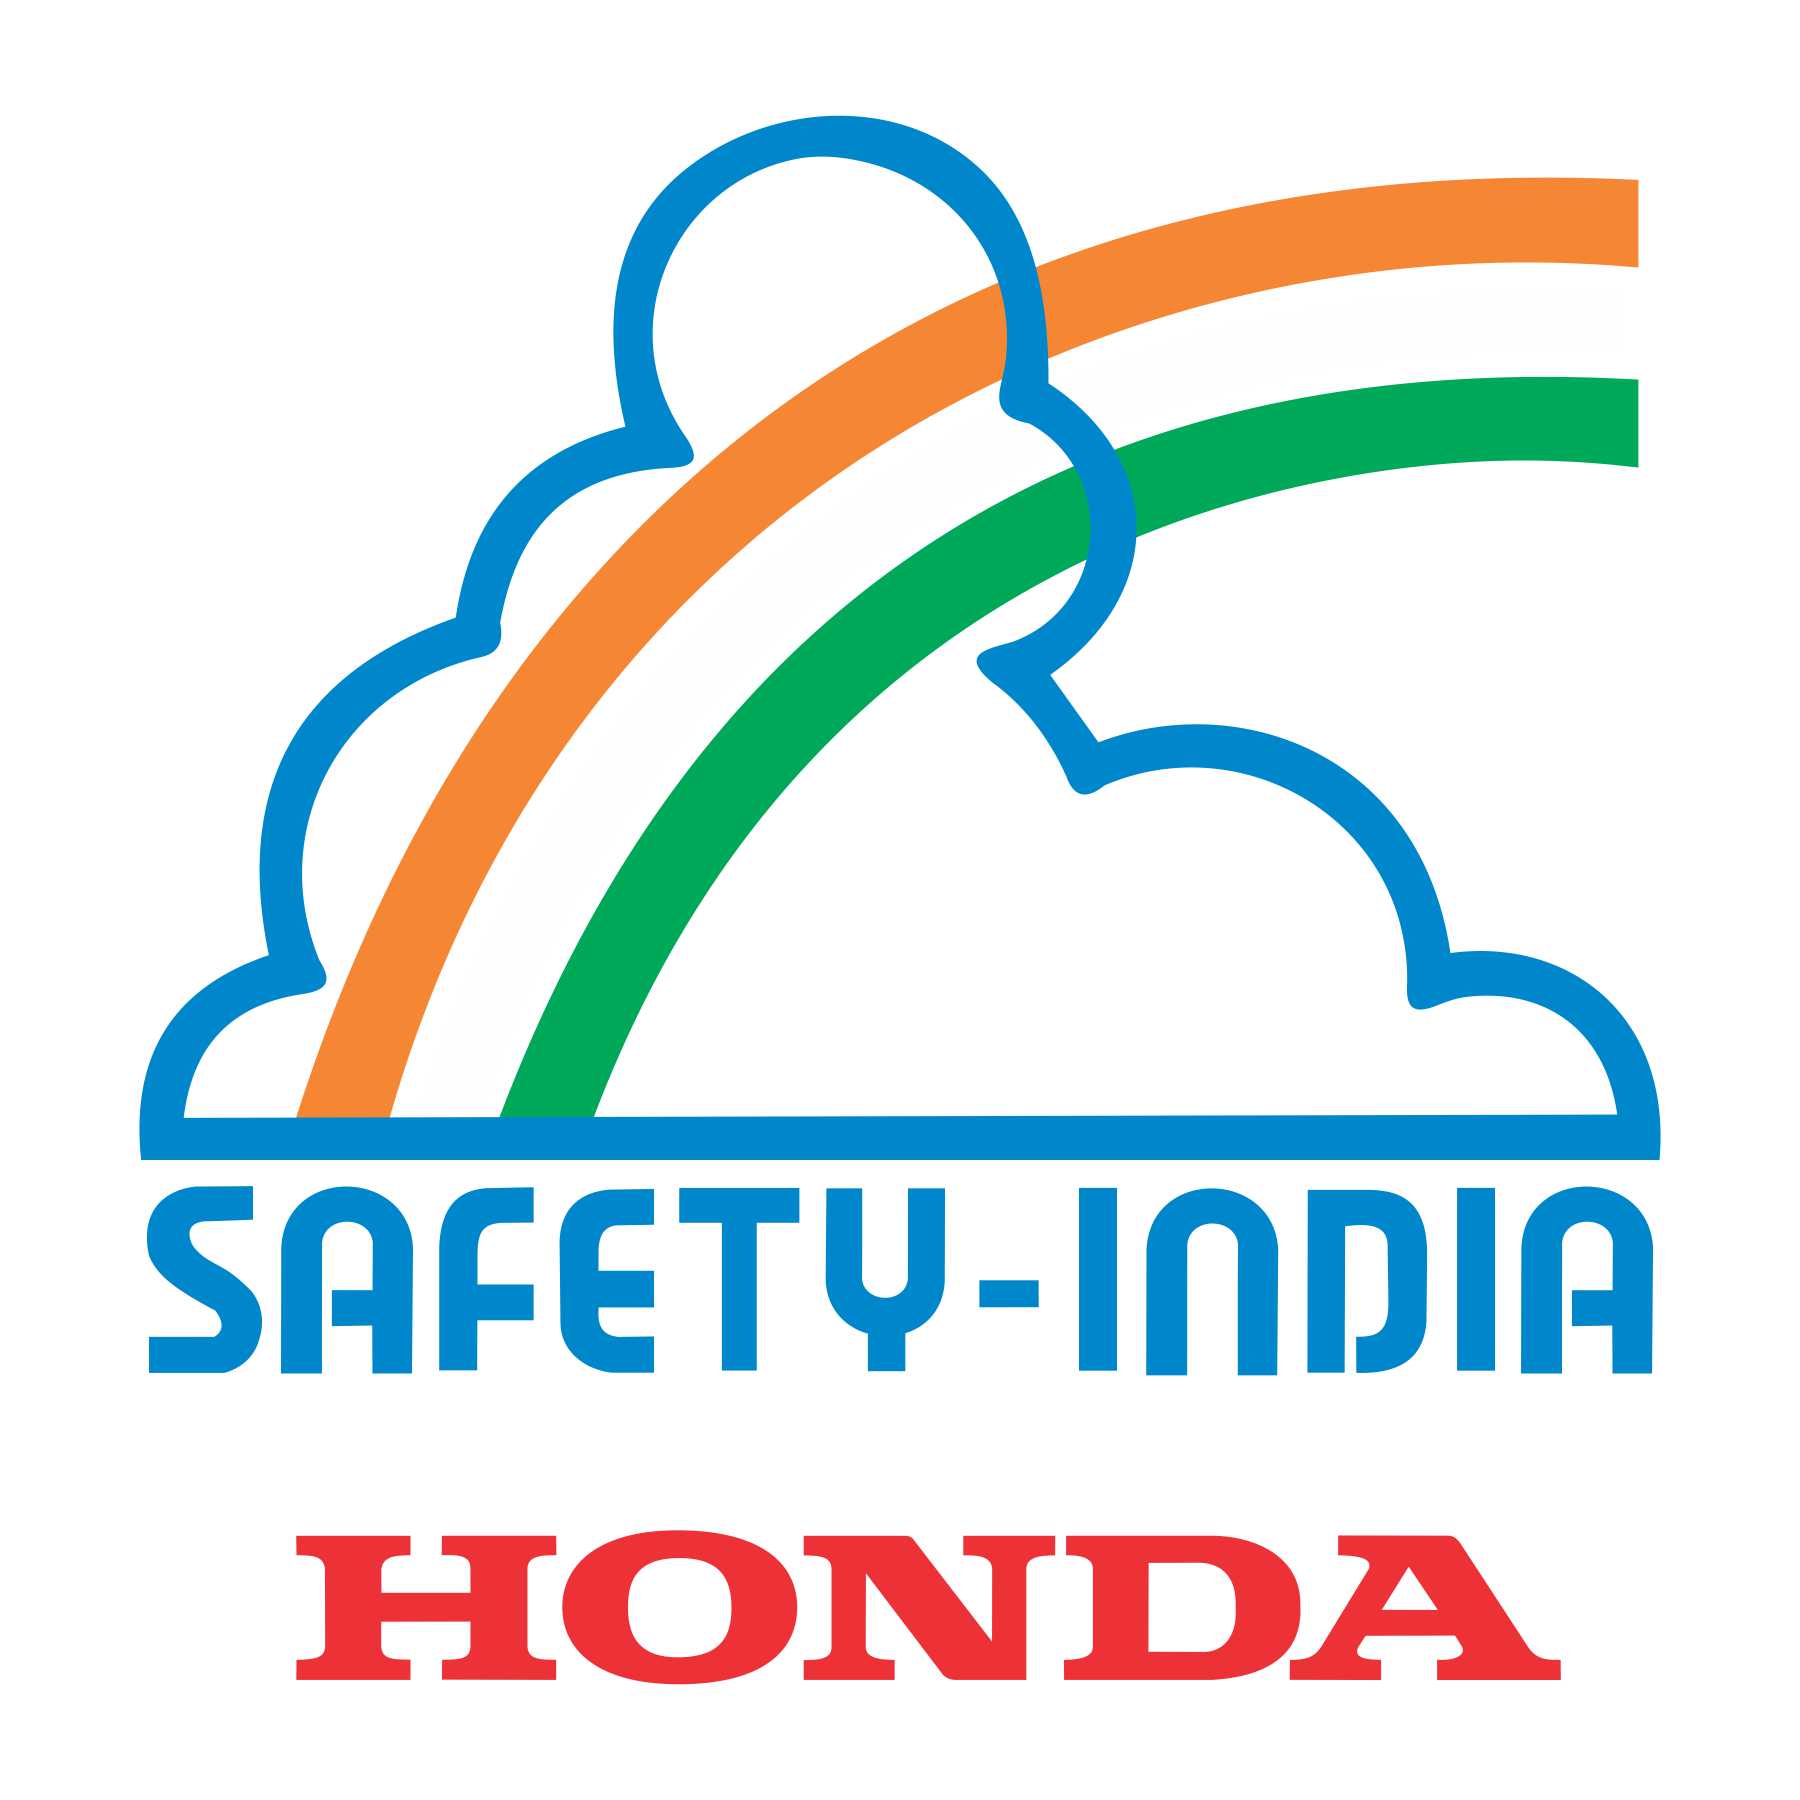 Honda Motorcycle & Scooter India in association with Hyderabad Traffic Police commemorate 8th anniversary of Traffic Training Park in Hyderabad decoding=